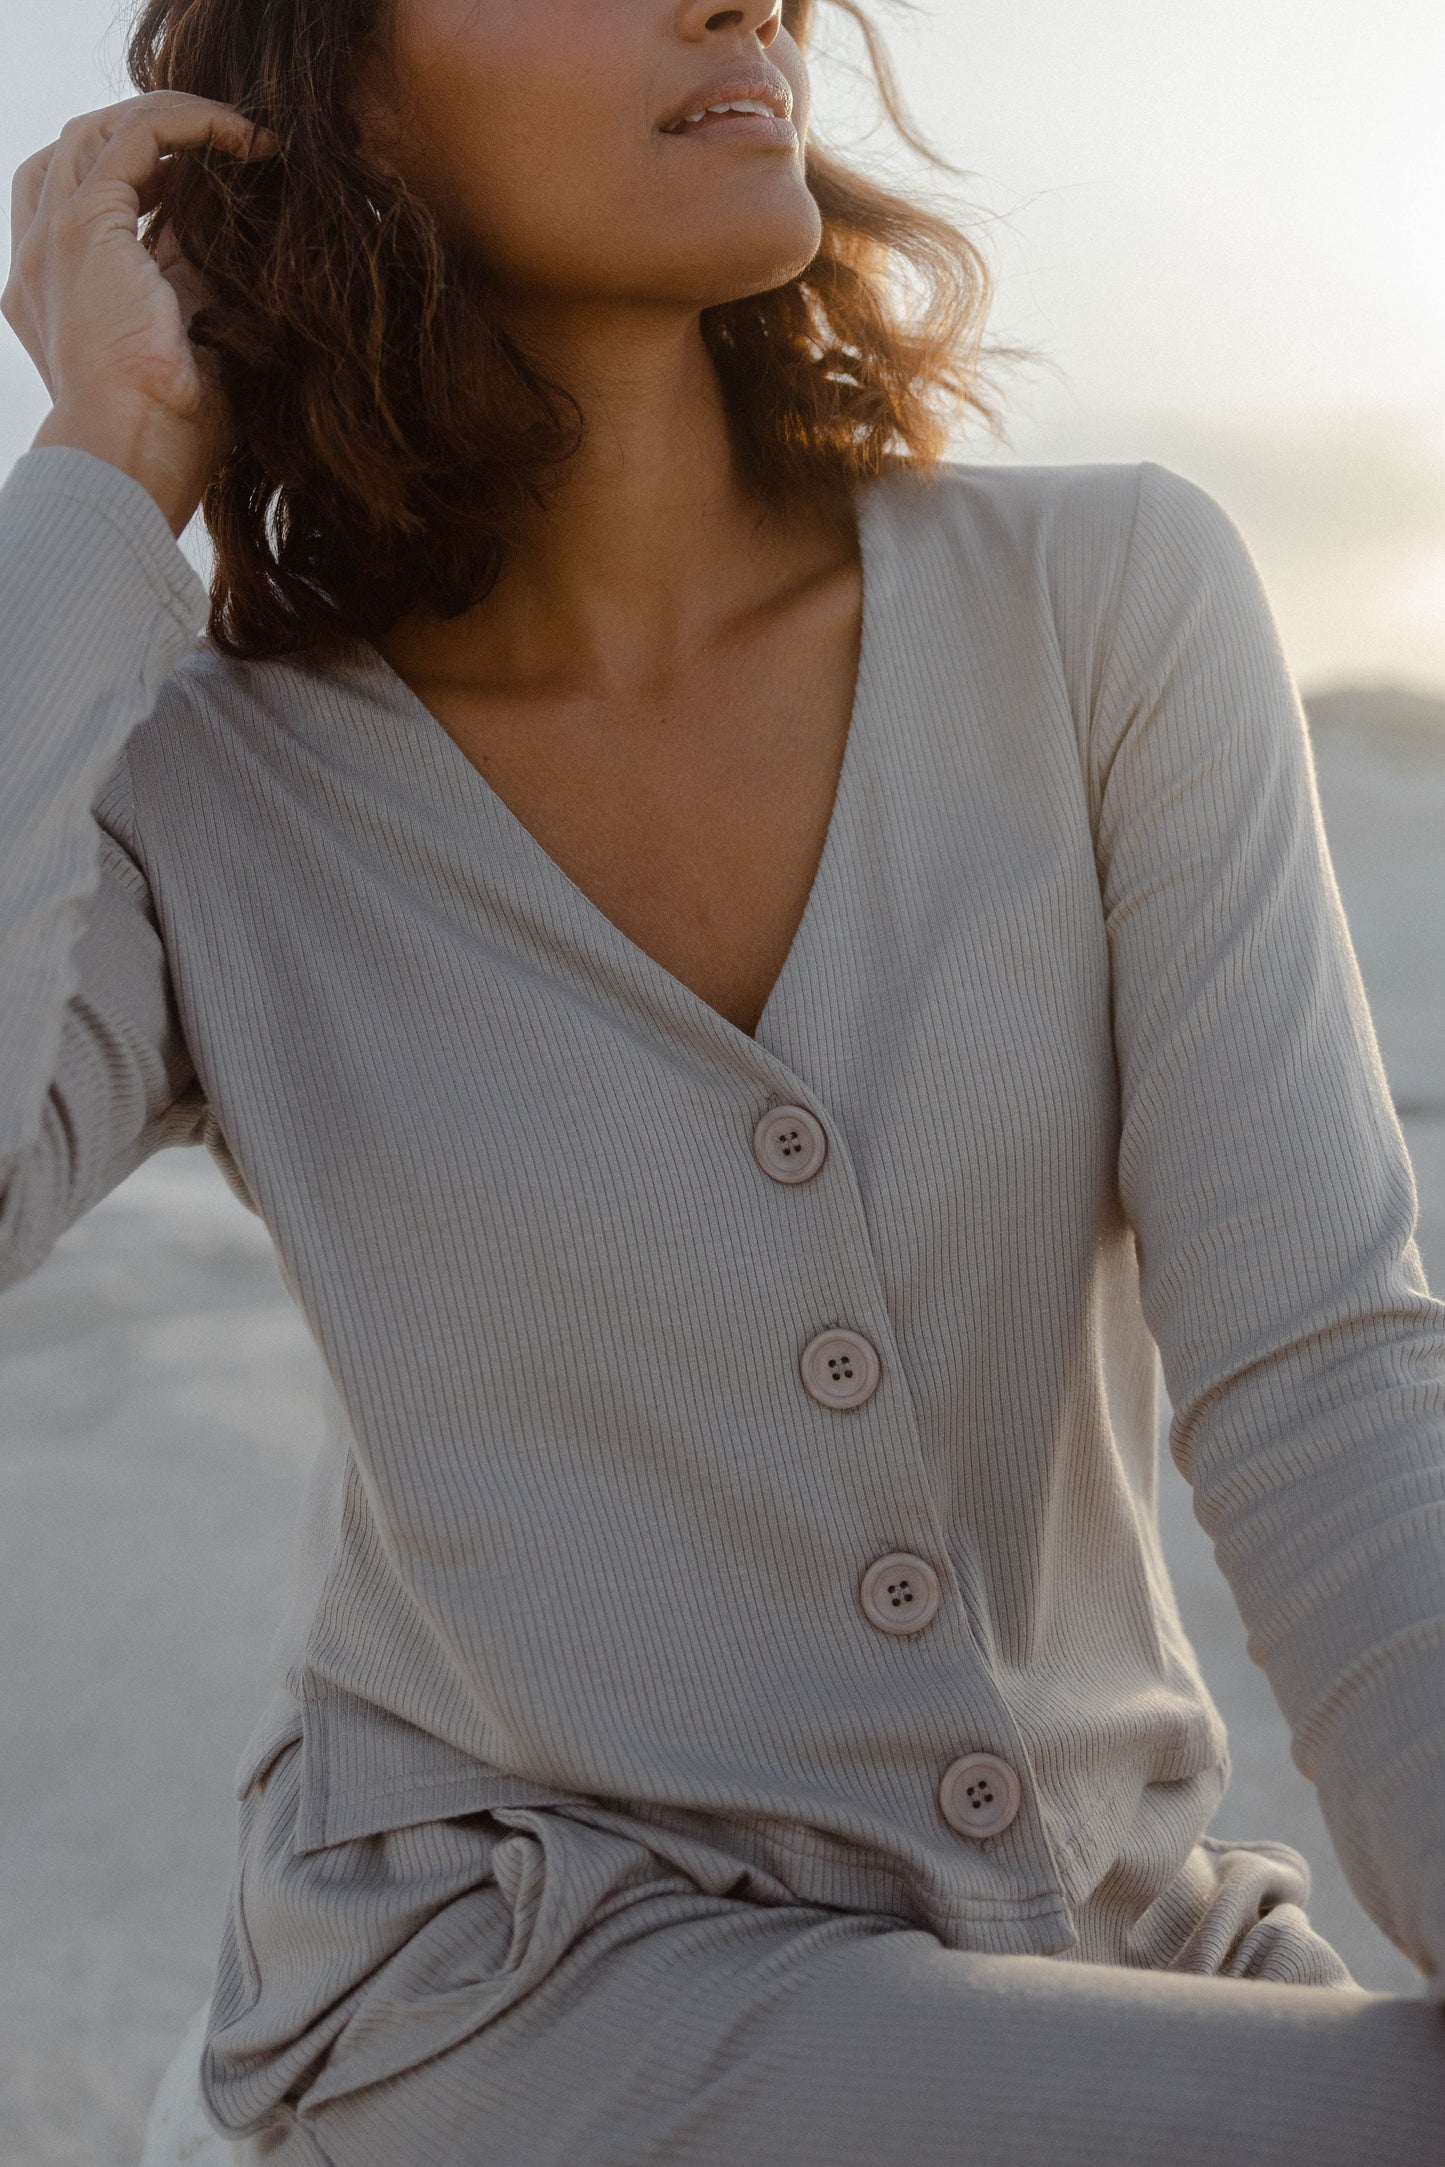 This 'Abby’ top is made from ribbed stretch-knit that sits nicely around your frame and has buttons that can be adjusted to your preferred coverage. It pairs perfectly with the matching pants and also looks great with wide-leg jeans.